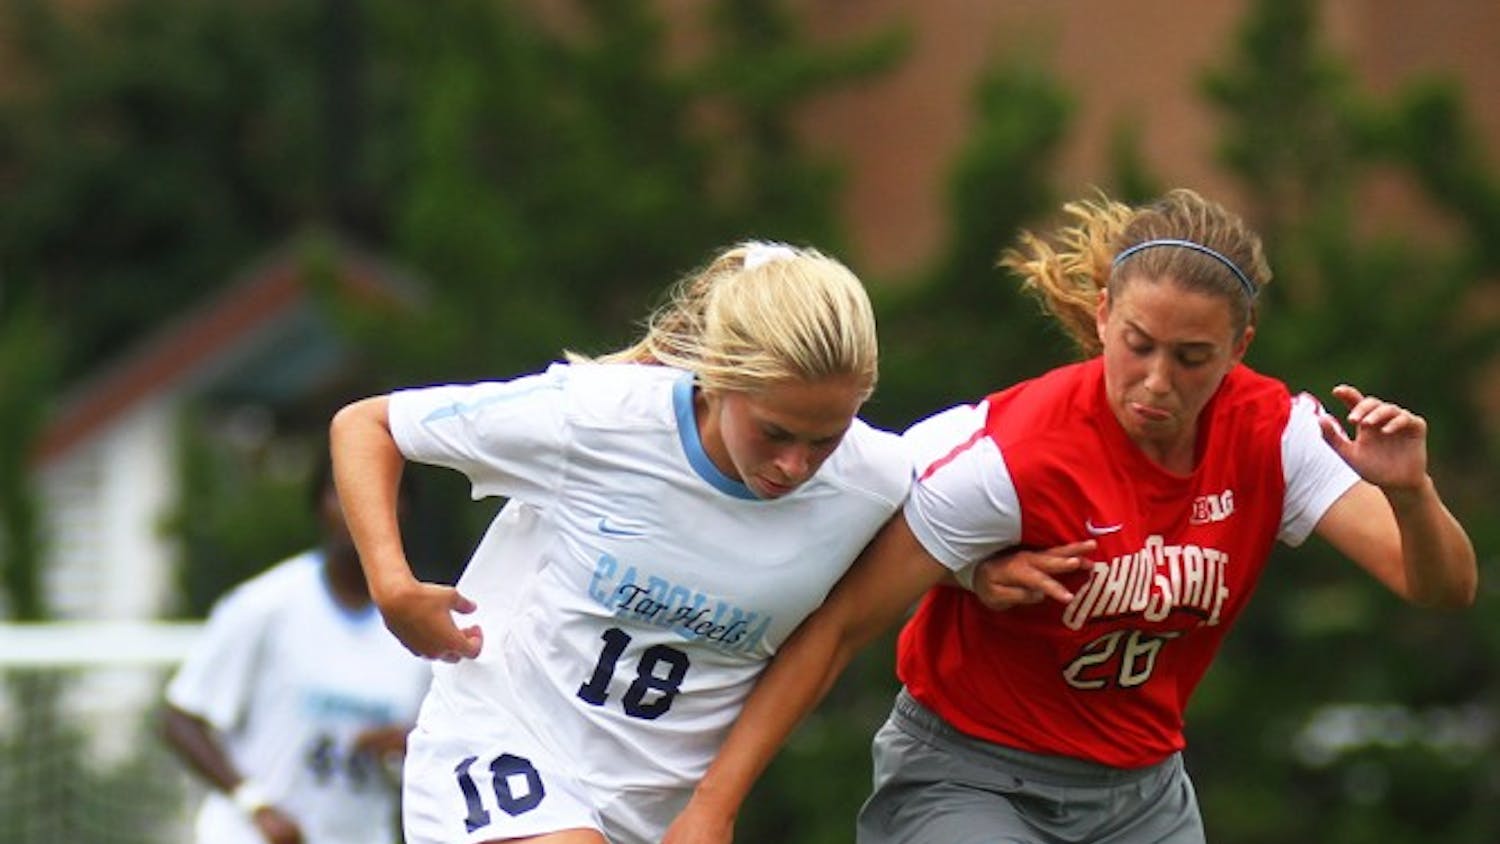 UNC midfielder Megan Buckingham (18) tries to create space between herself and Ohio State midfielder Sydney Dudley (26).  Buckingham would go on to score the game-winner for the Tar Heels in their 1-0 win.